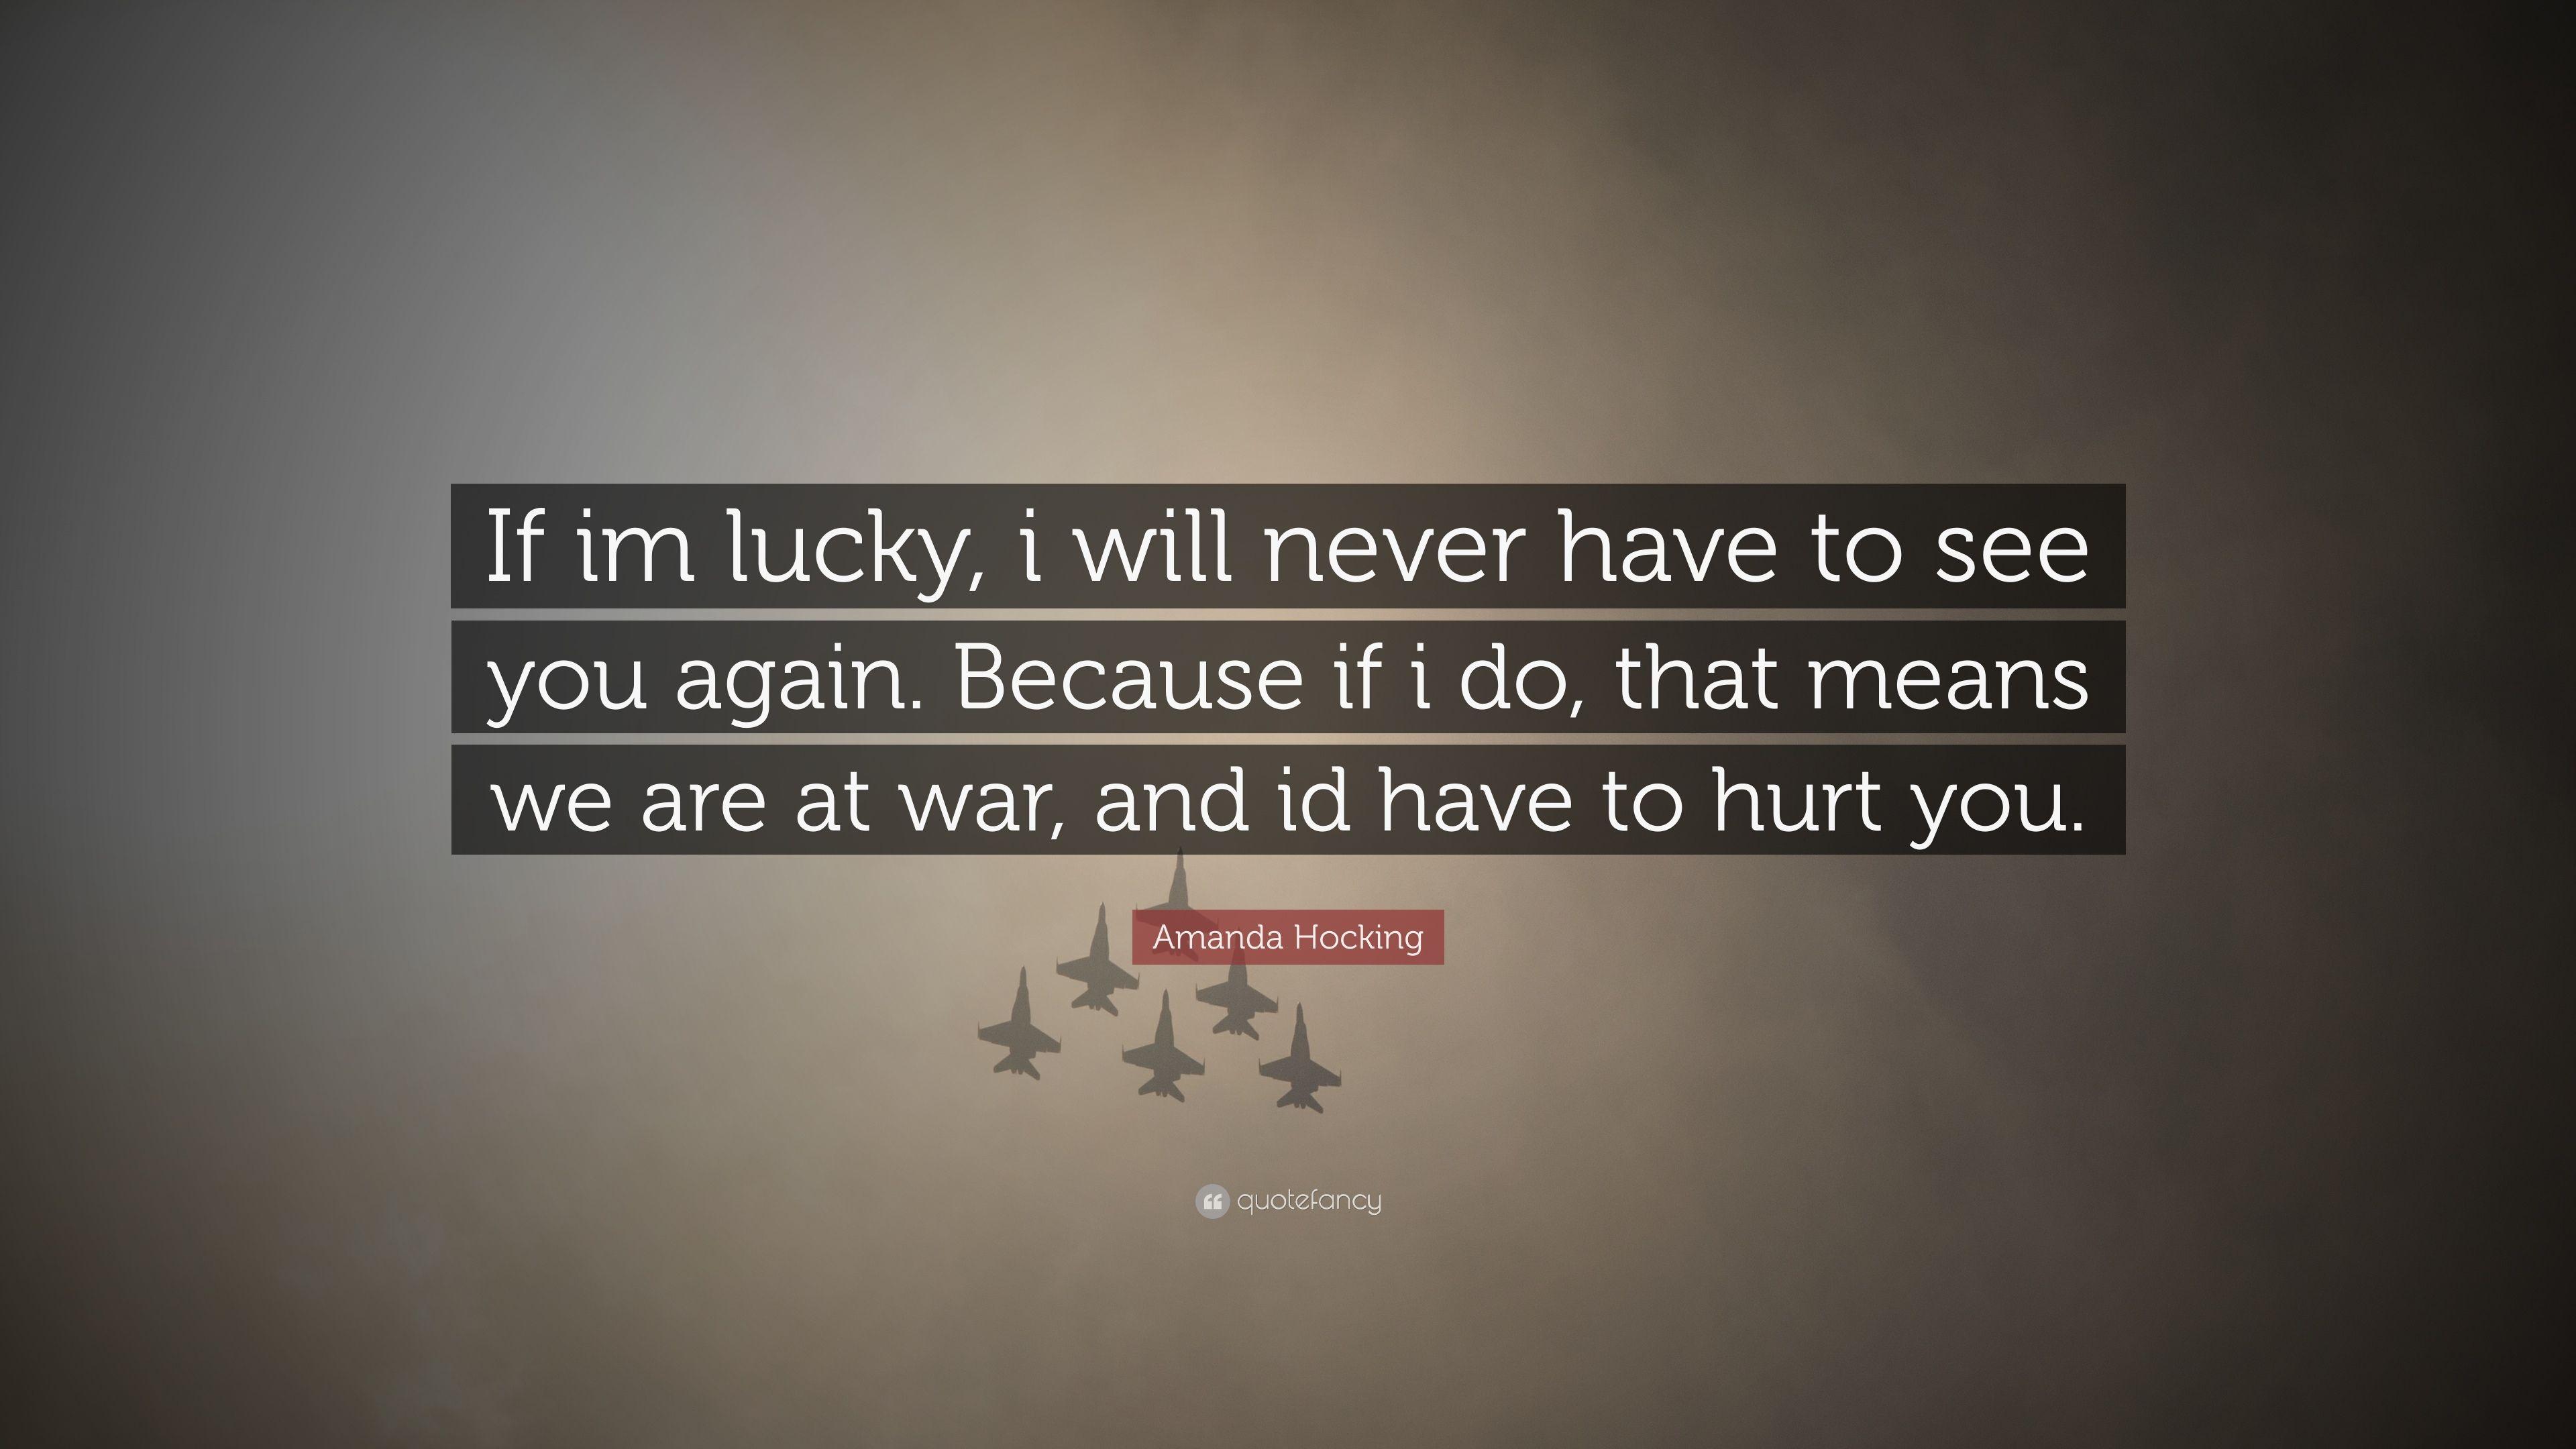 Amanda Hocking Quote: “If im lucky, i will never have to see you